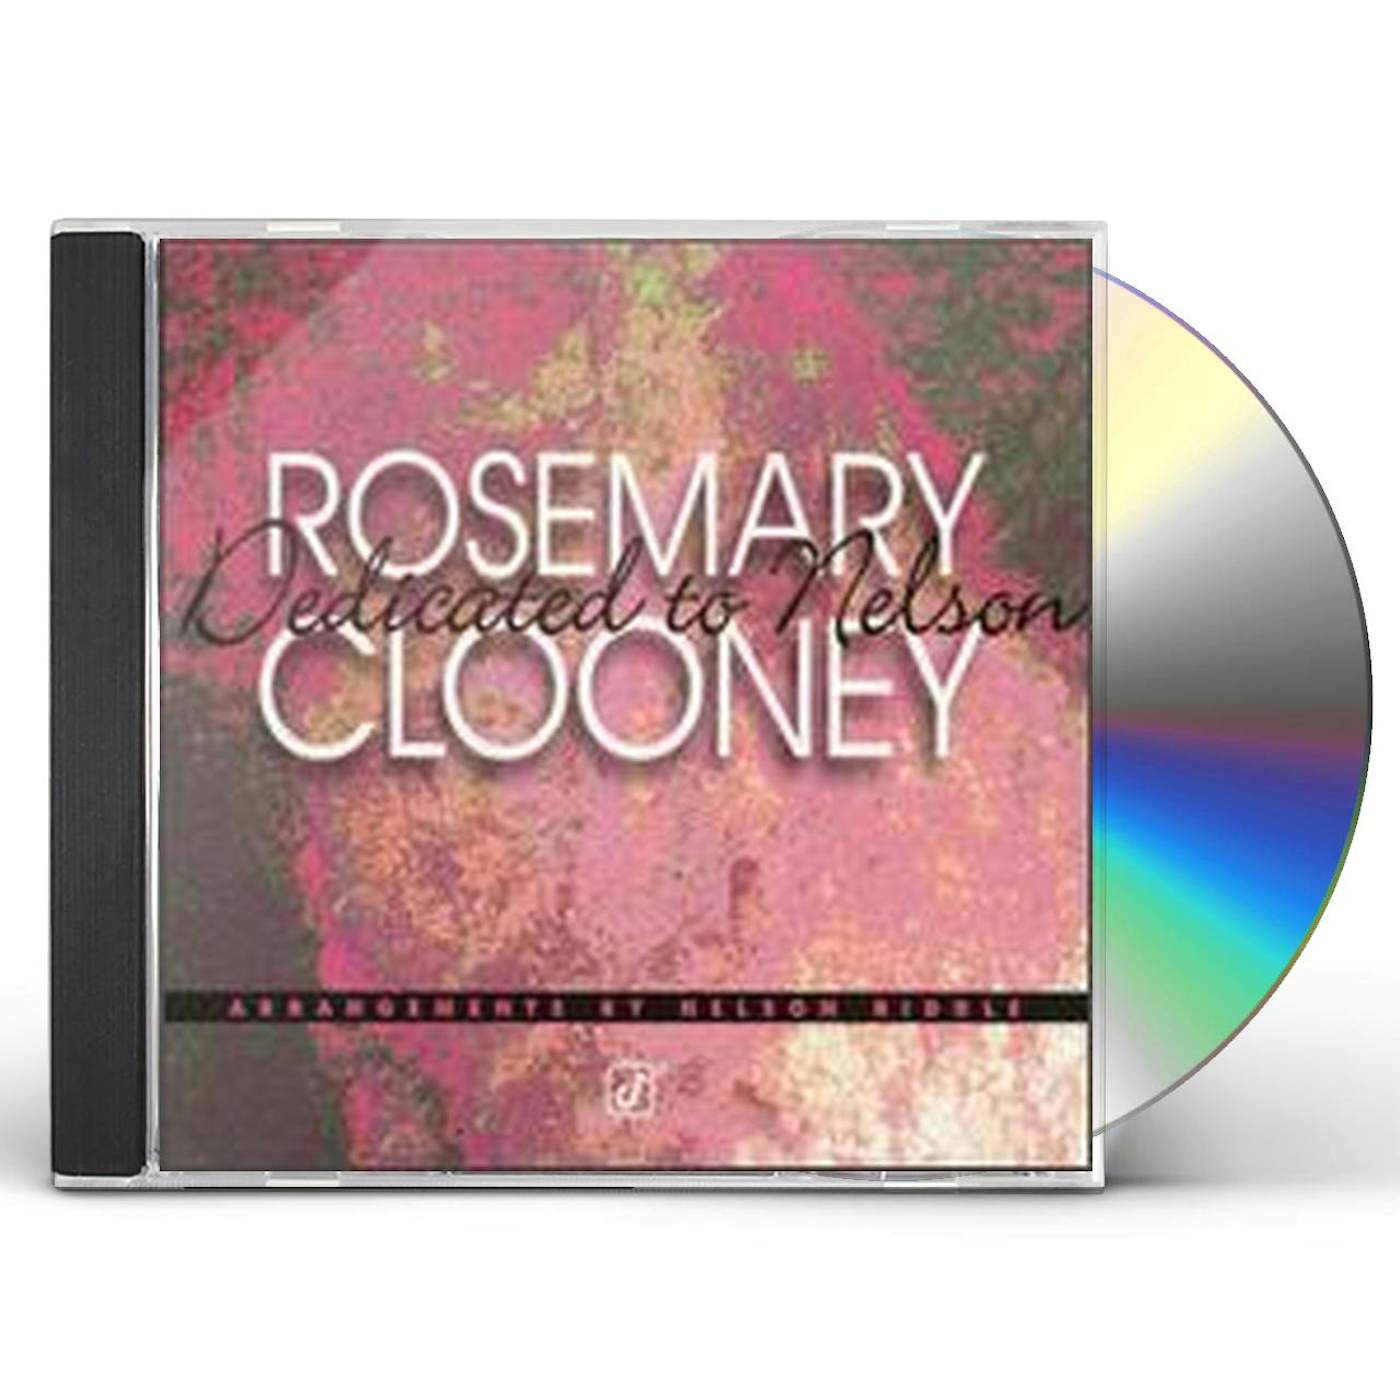 Rosemary Clooney DEDICATED TO NELSON RIDDLE CD